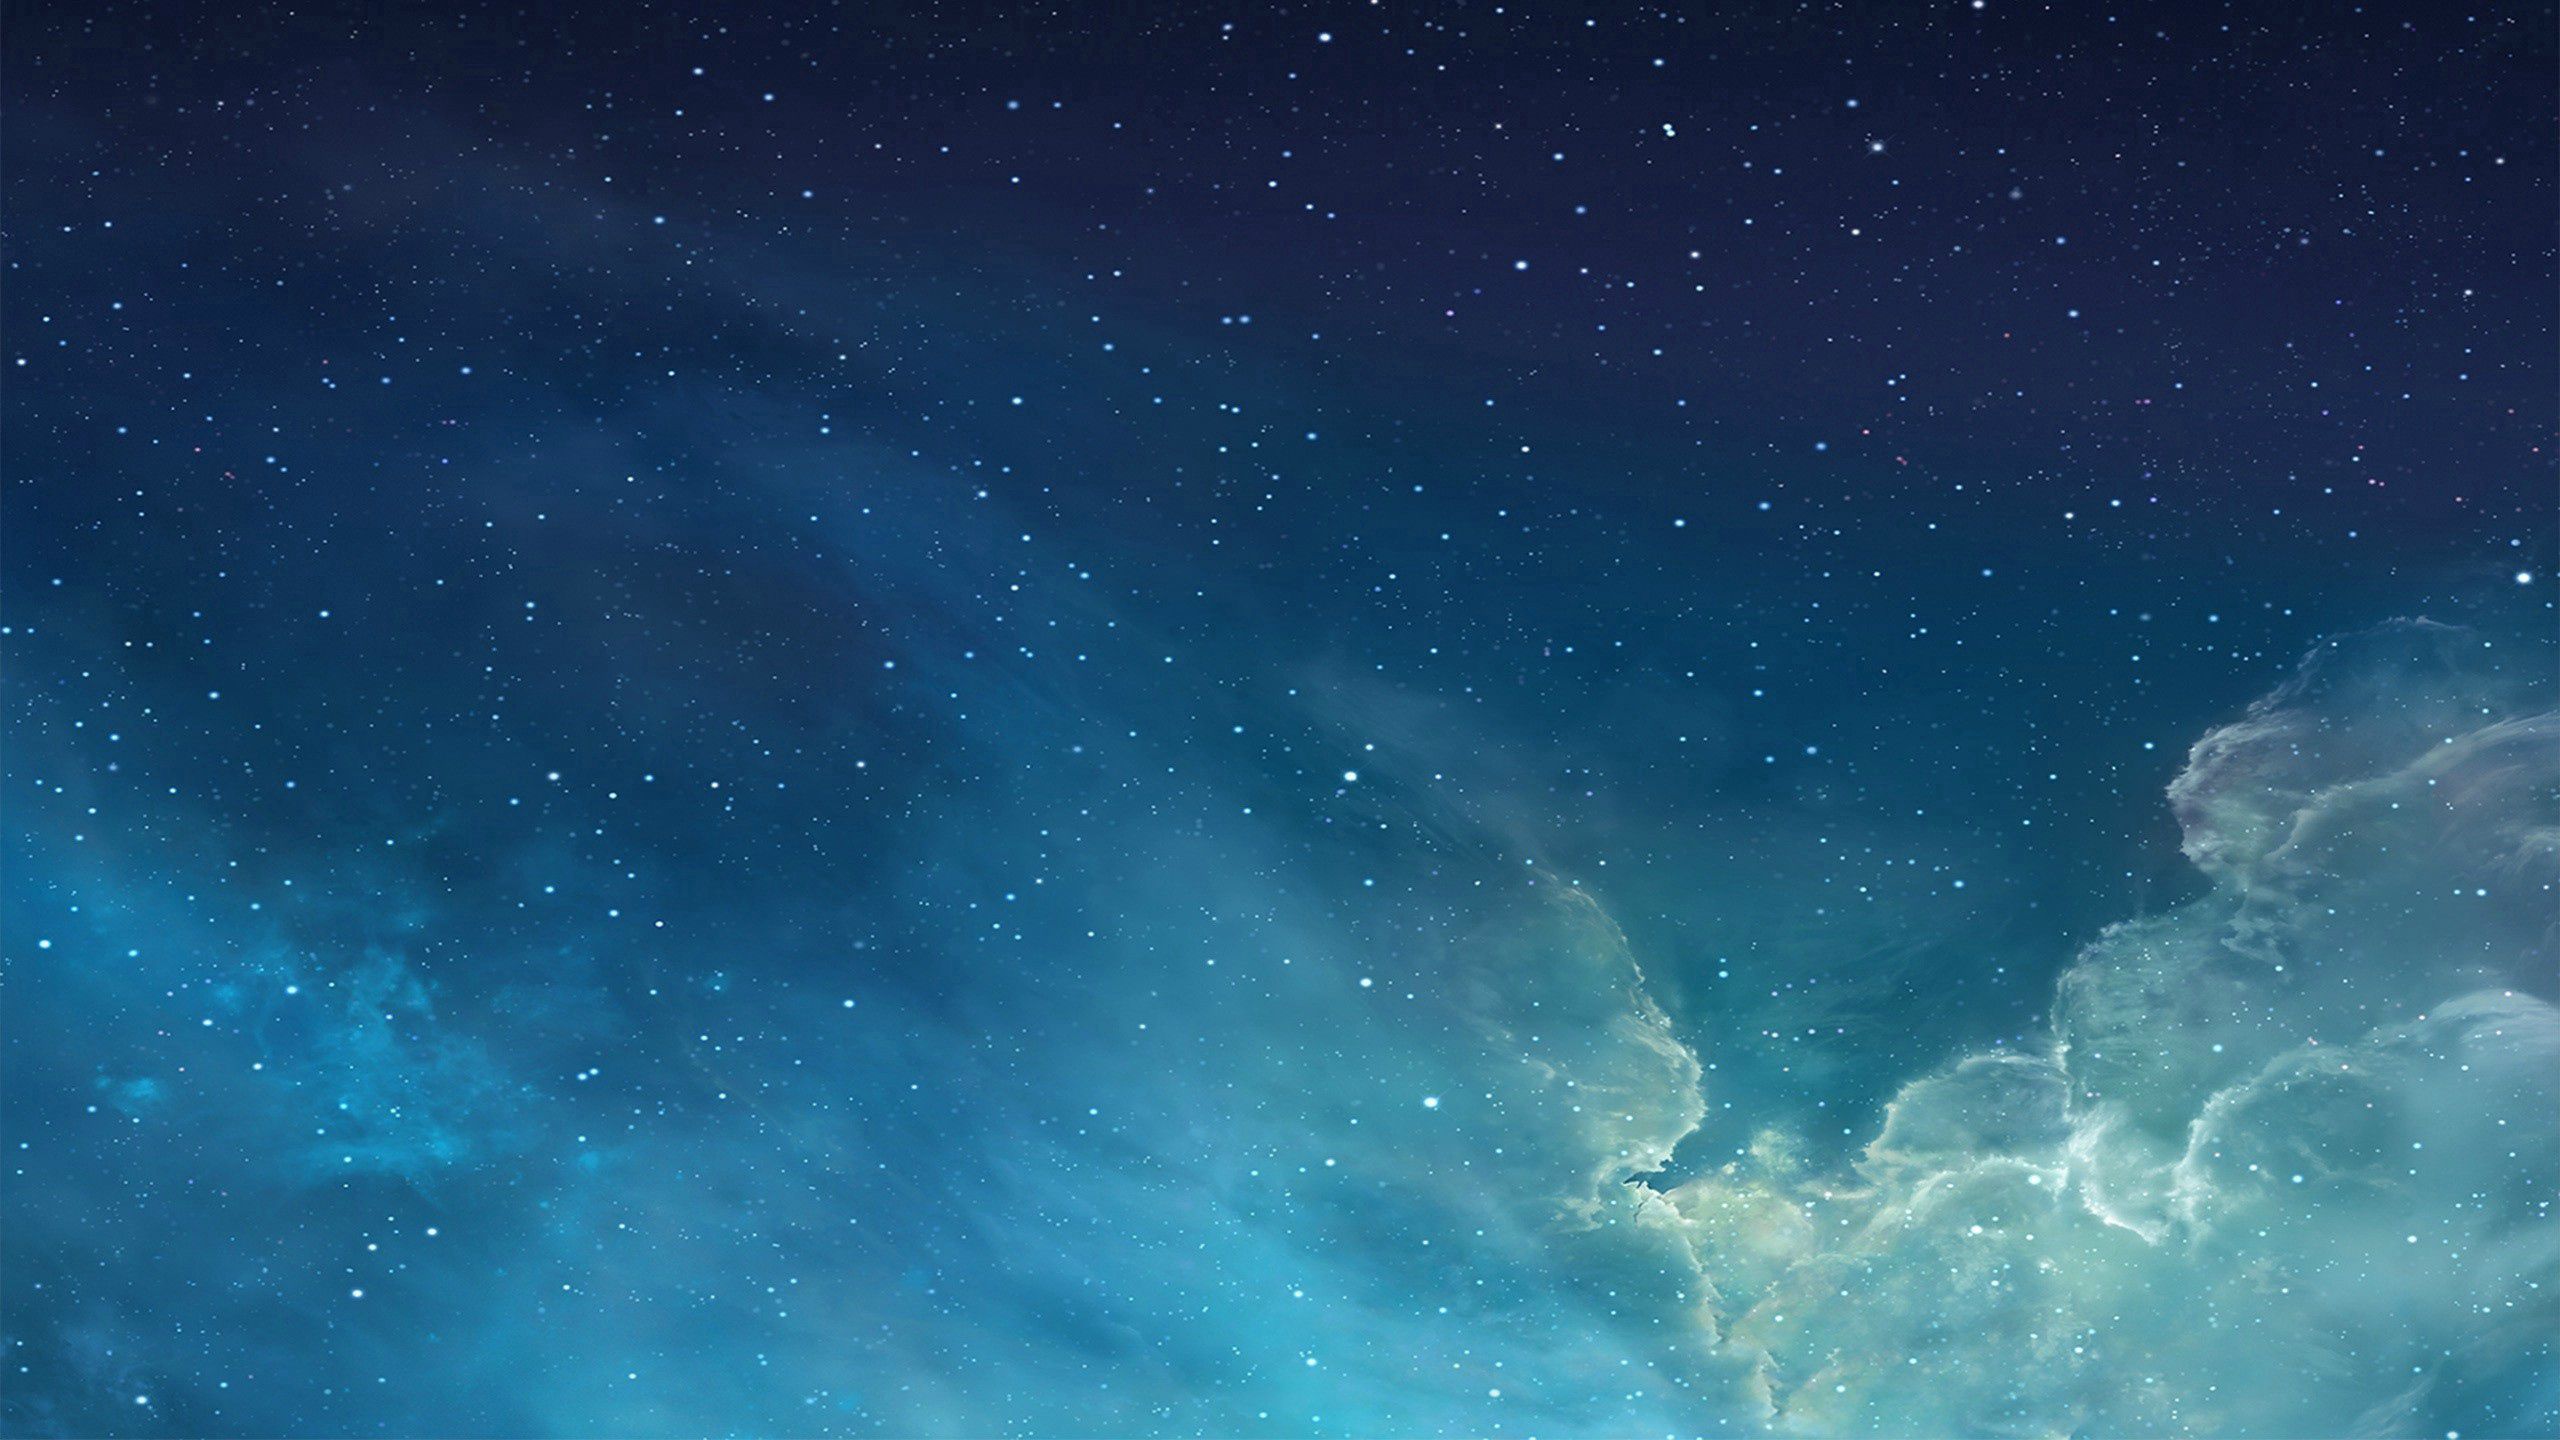 Download wallpaper 2560x1440 sky, stars, clouds, abstract HD